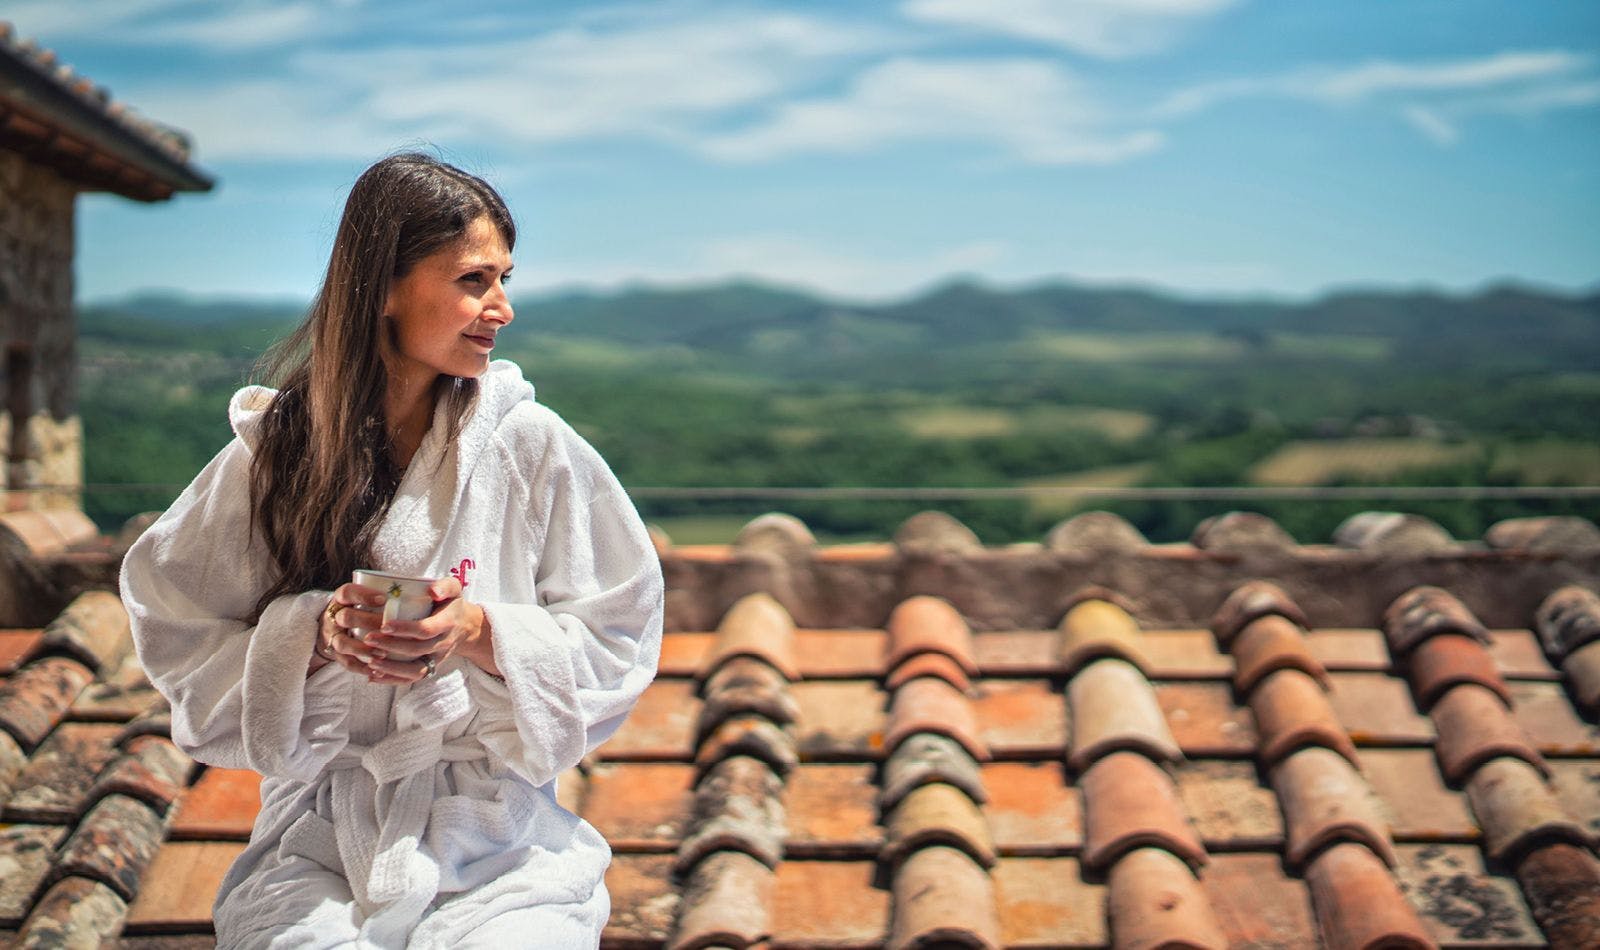 Where to relax in tuscany?